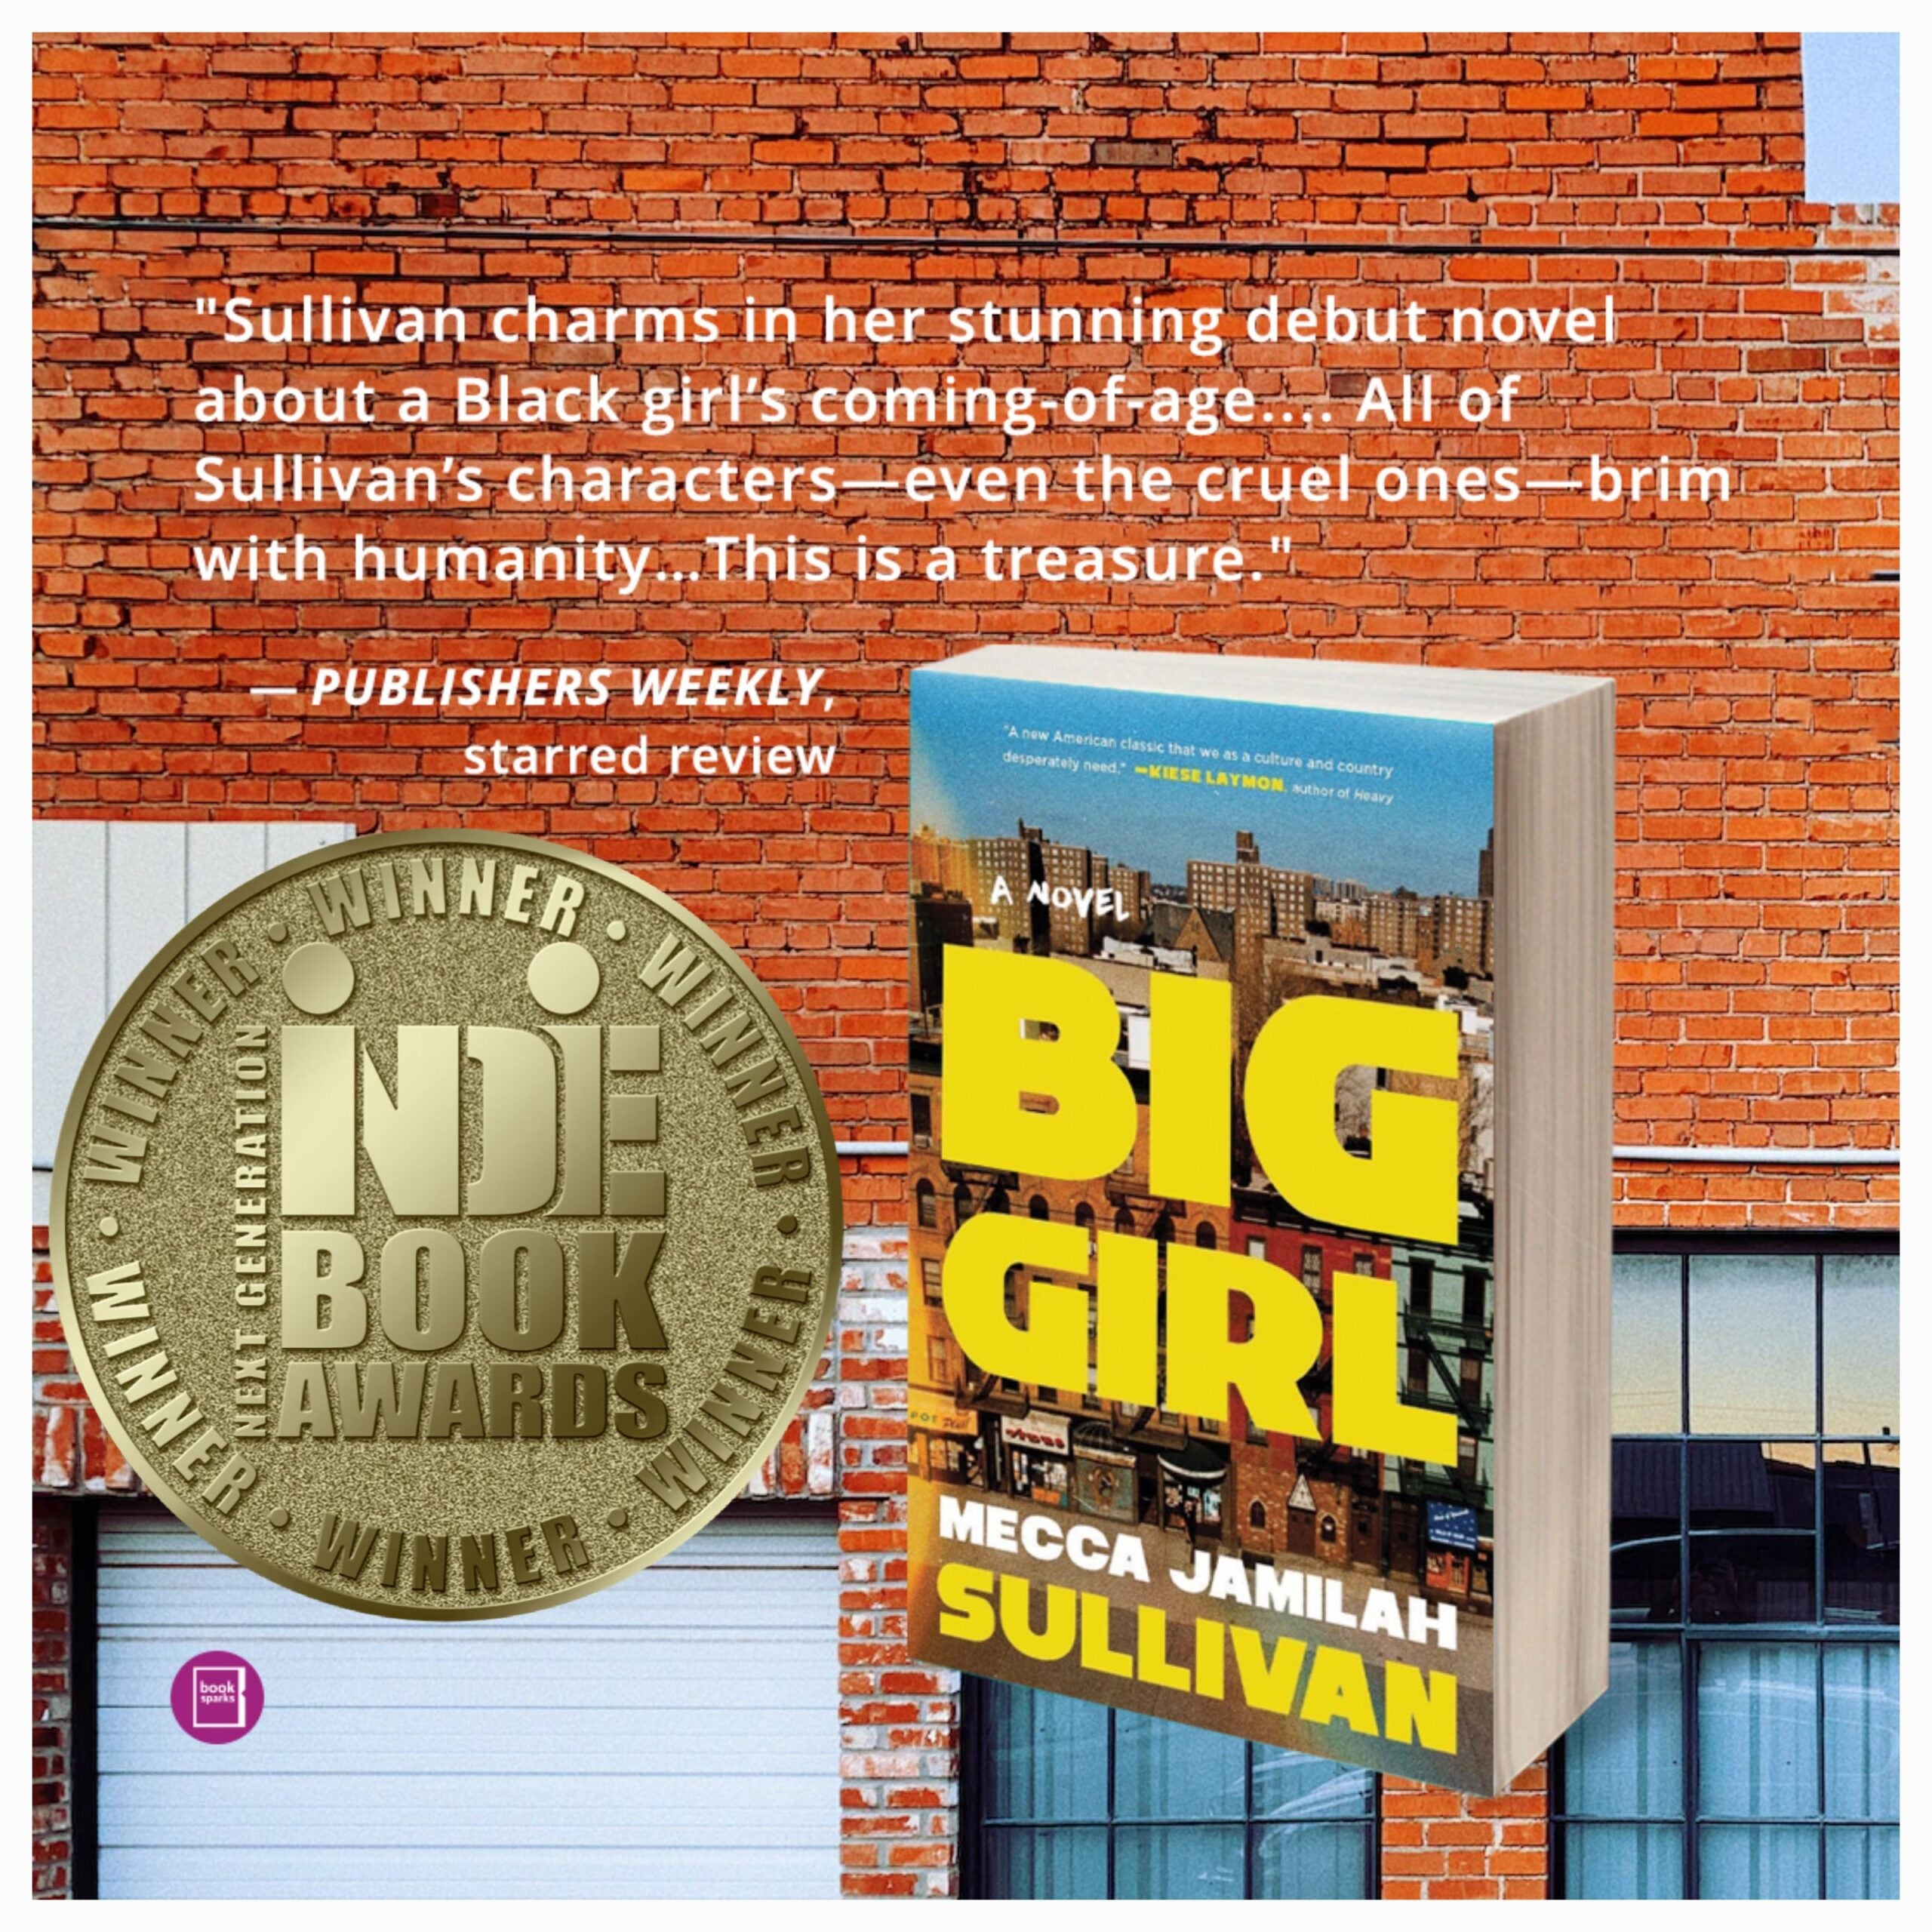 Cover of BIG GIRL with award medal and starred review quote from Publisher's Weekly stating, "Sullivan charms in her stunning debut novel about a Black girl's coming-of-age… All of Sullivan's characters– even the cruel ones– brim with humanity… This is a treasure."